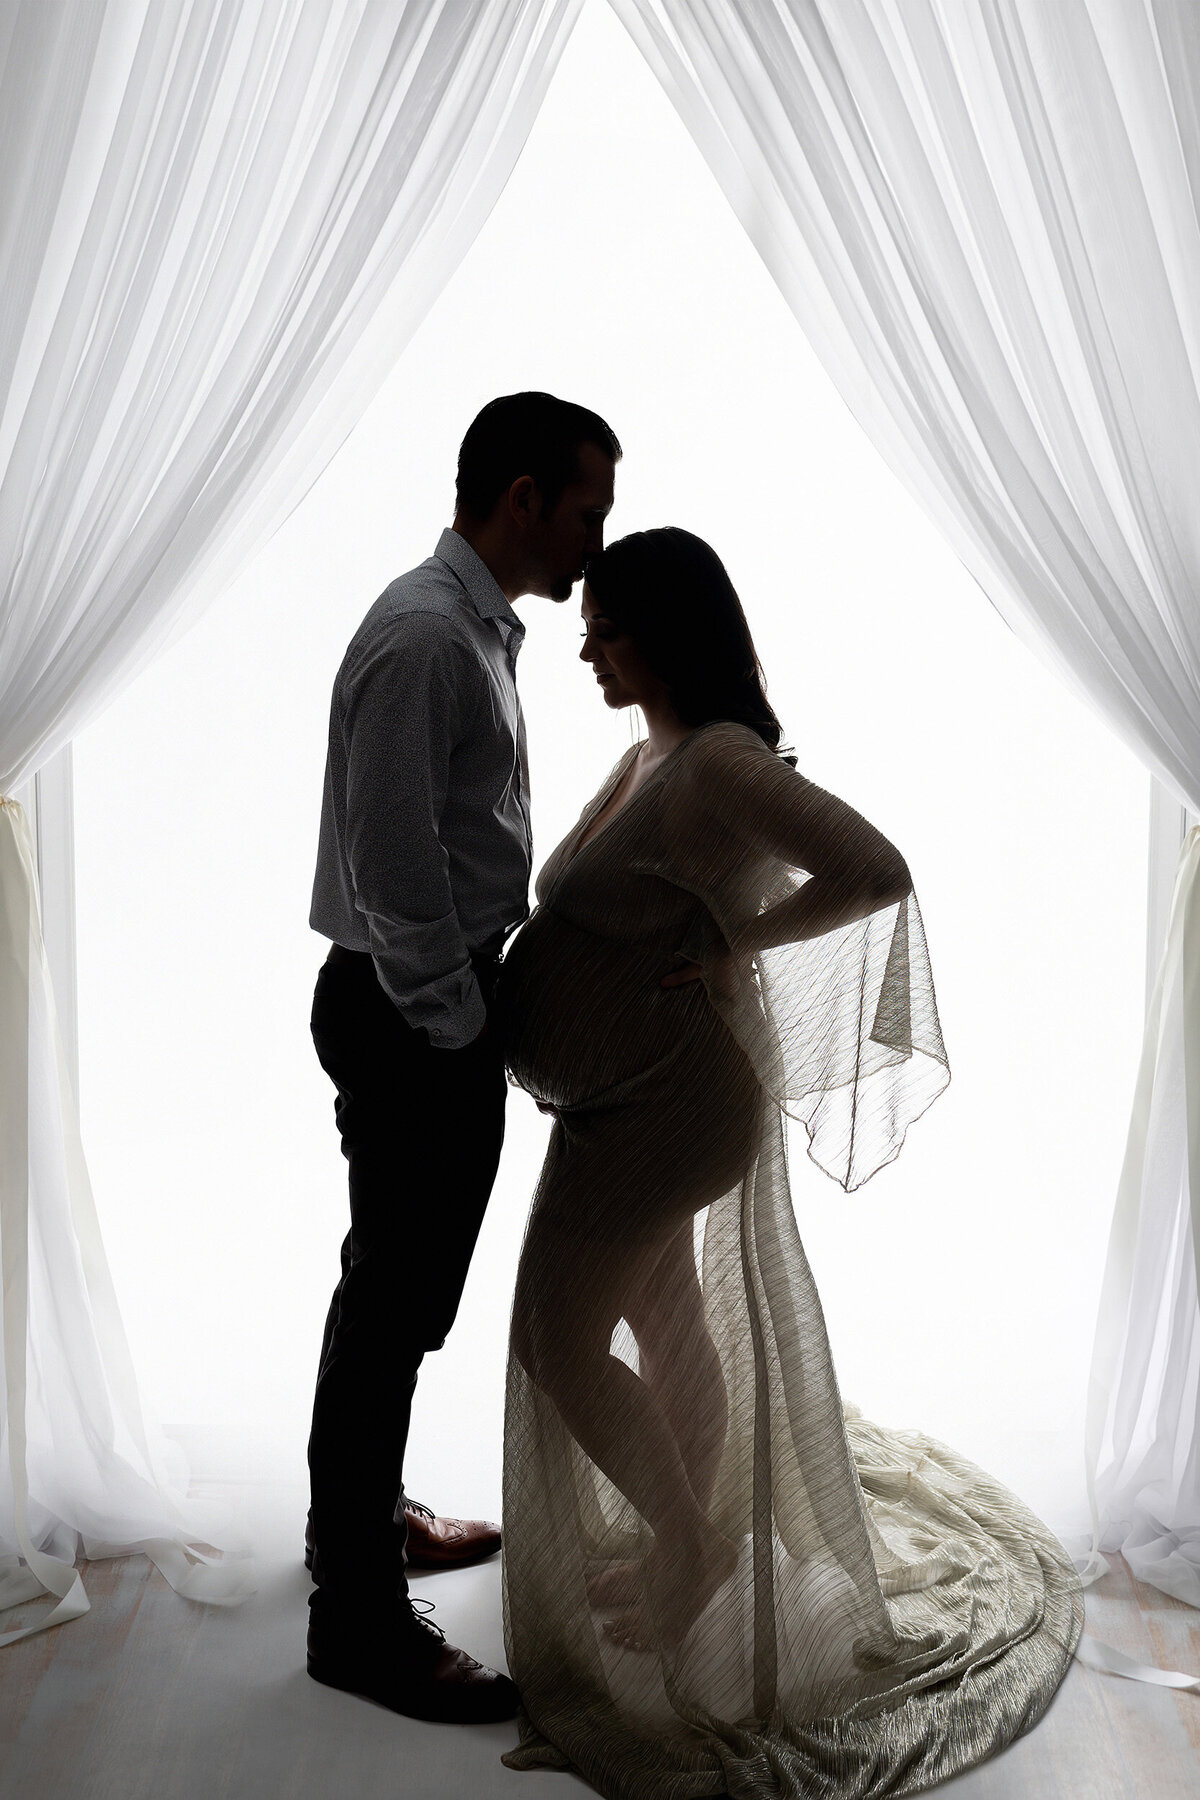 Couple facing eachother shown in shadow with white-draped window behind. Woman cradles her pregnant belly while partner kisses her forehead.